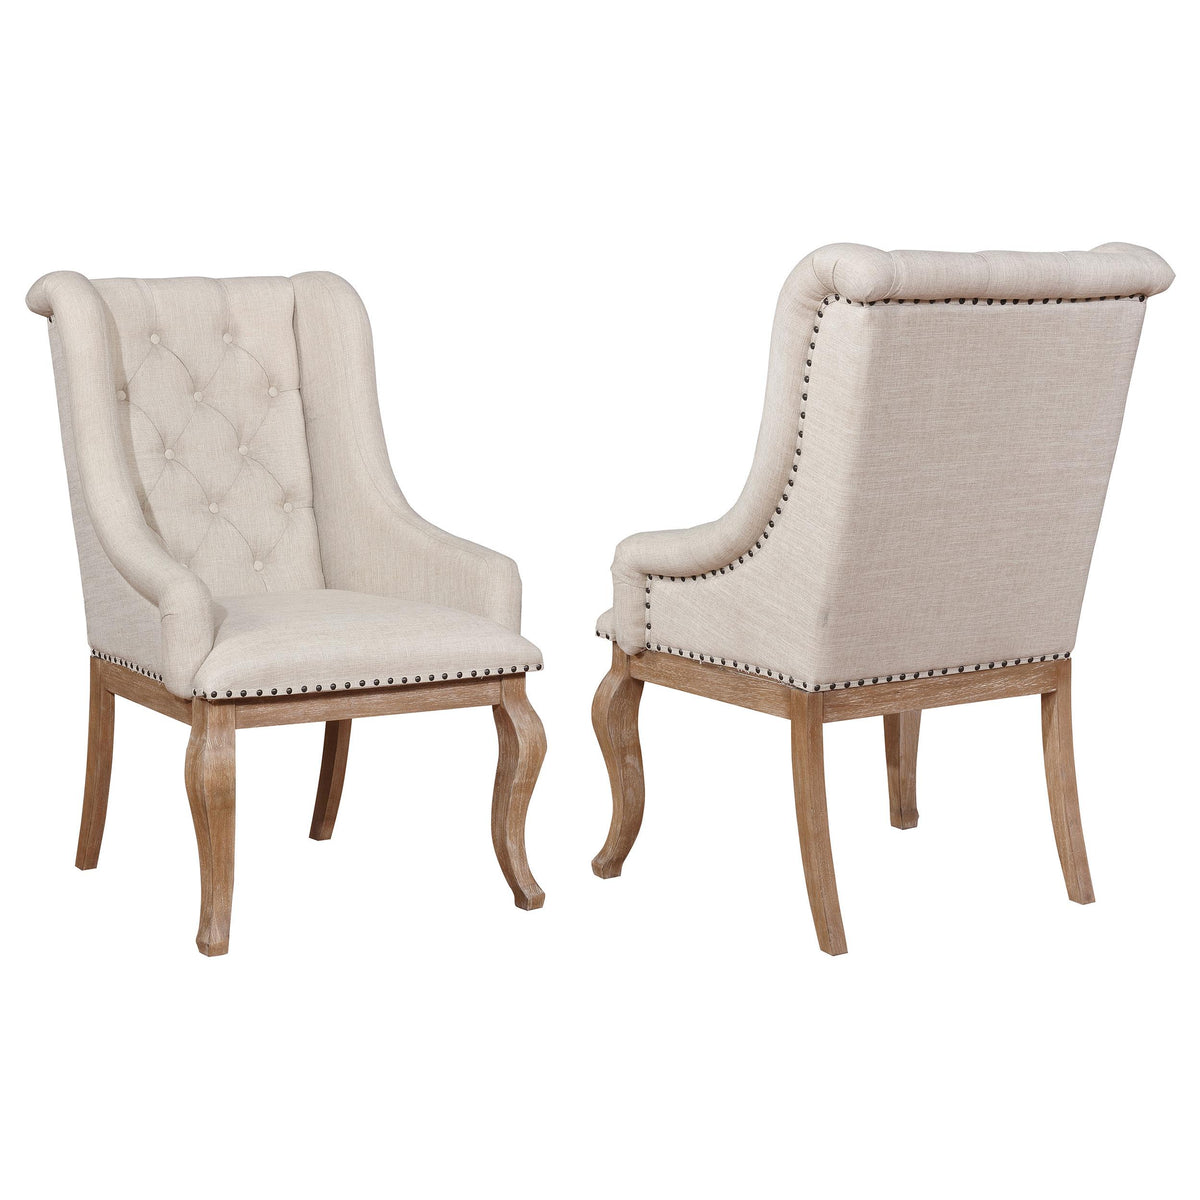 Brockway Tufted Arm Chairs Cream and Barley Brown (Set of 2) Brockway Tufted Arm Chairs Cream and Barley Brown (Set of 2) Half Price Furniture